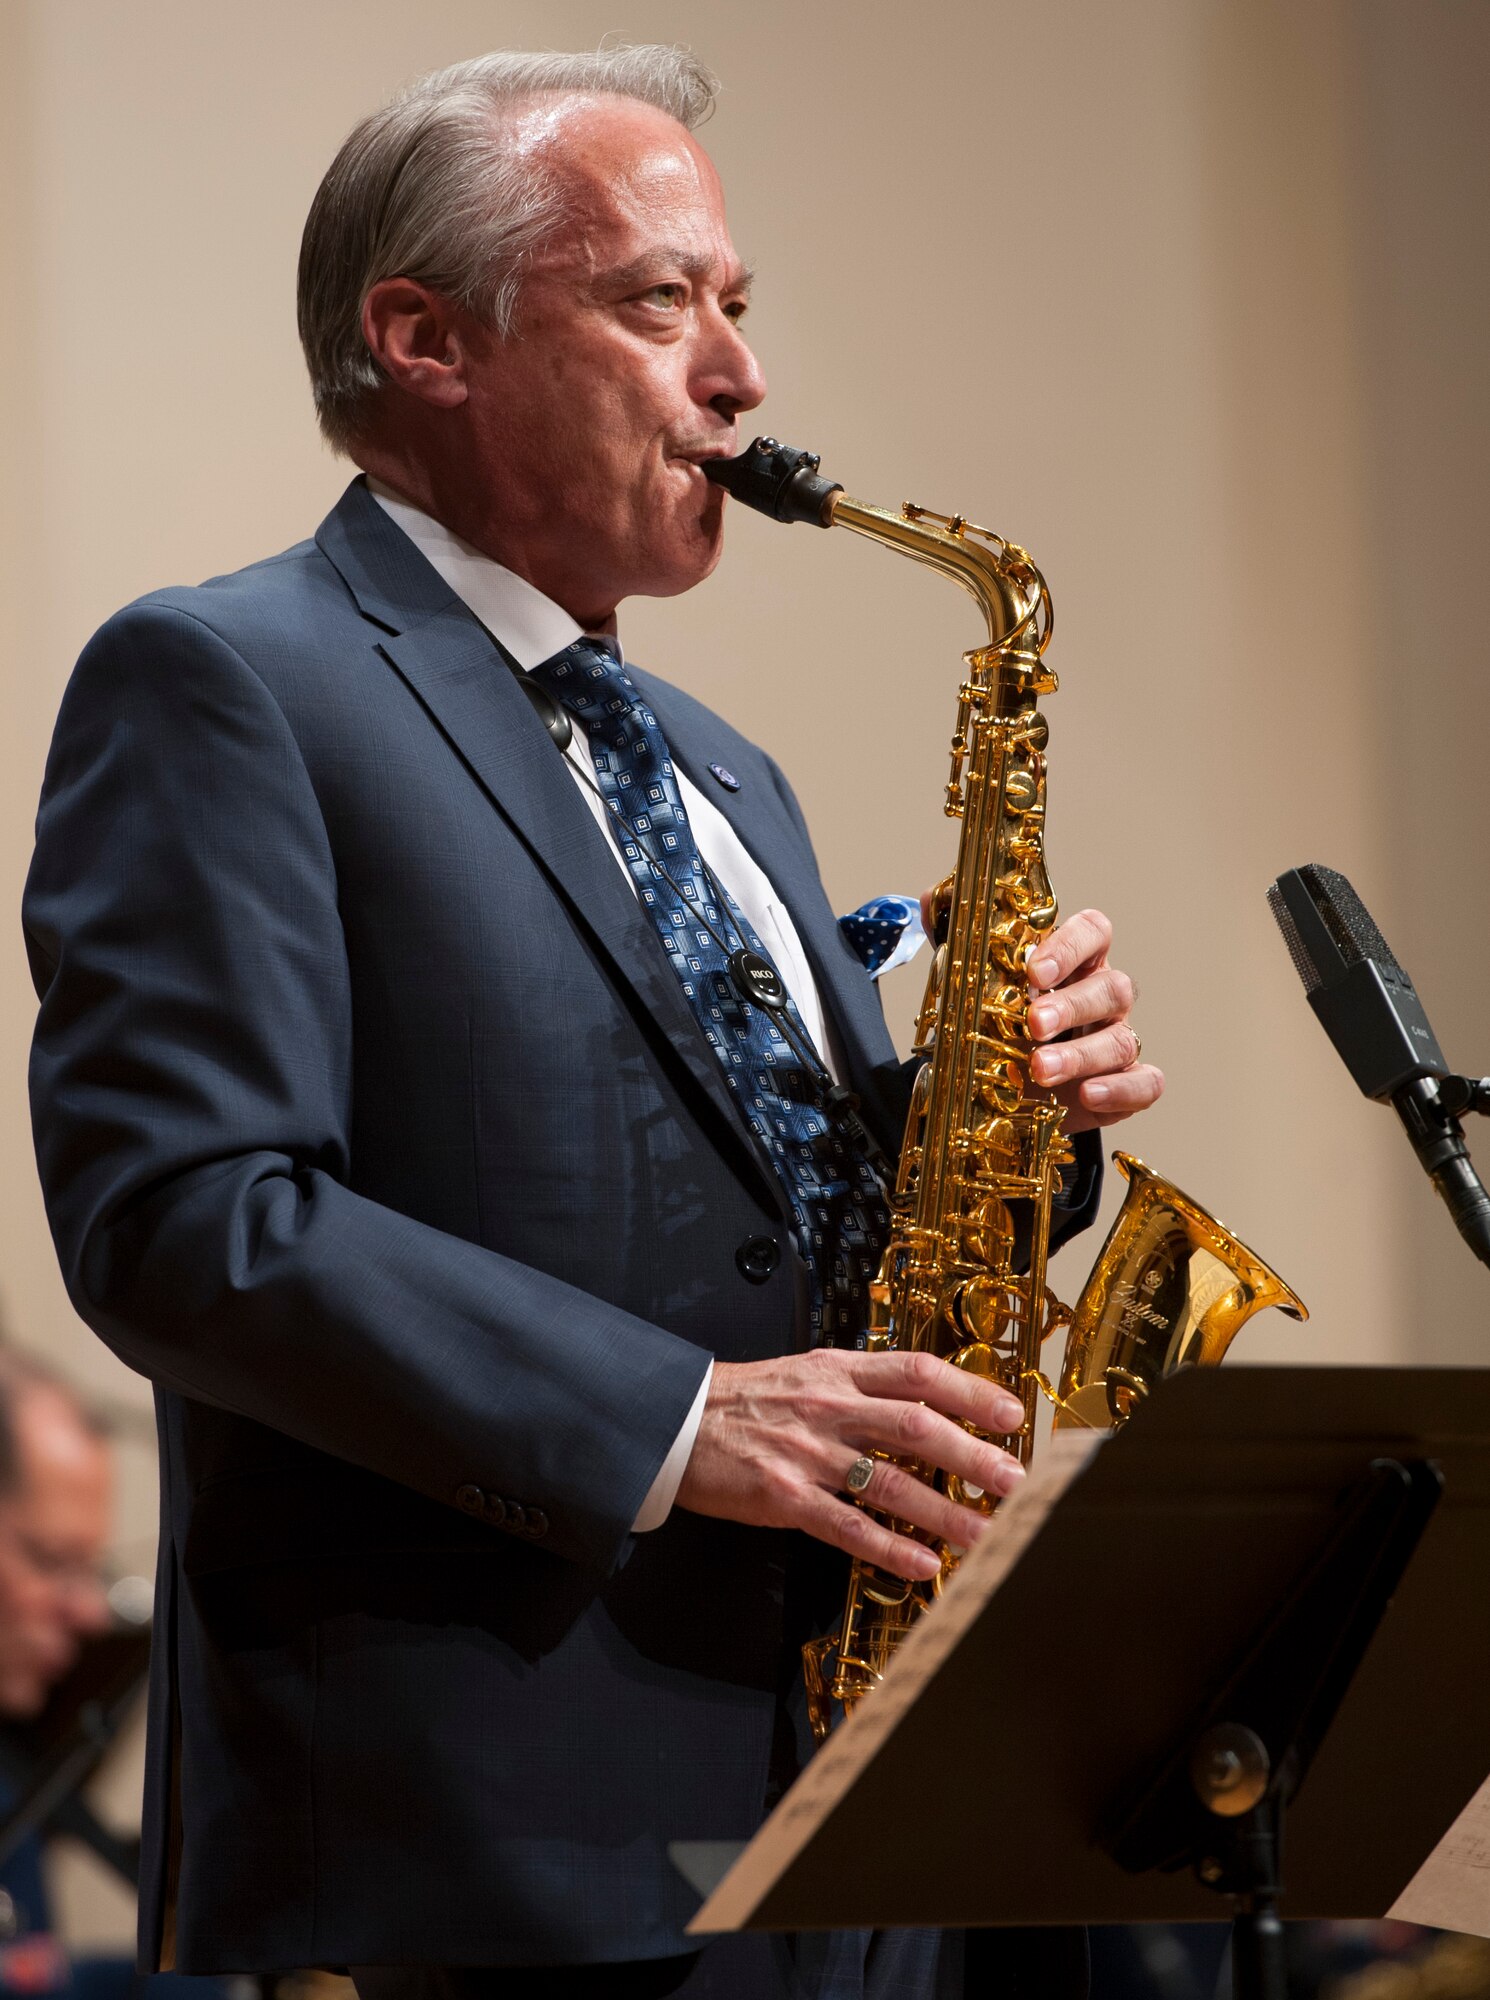 Retired Chief Master Sgt. Joe Eckert performs a solo with the Airmen of Note during a concert at Texas Christian University in Fort Worth, Texas, April 18. Eckert, who spent 20 years with the band, is now the director of the jazz program and the saxophone professor at TCU. (U.S. Air Force photo/ Tech. Sgt. James Bolinger)